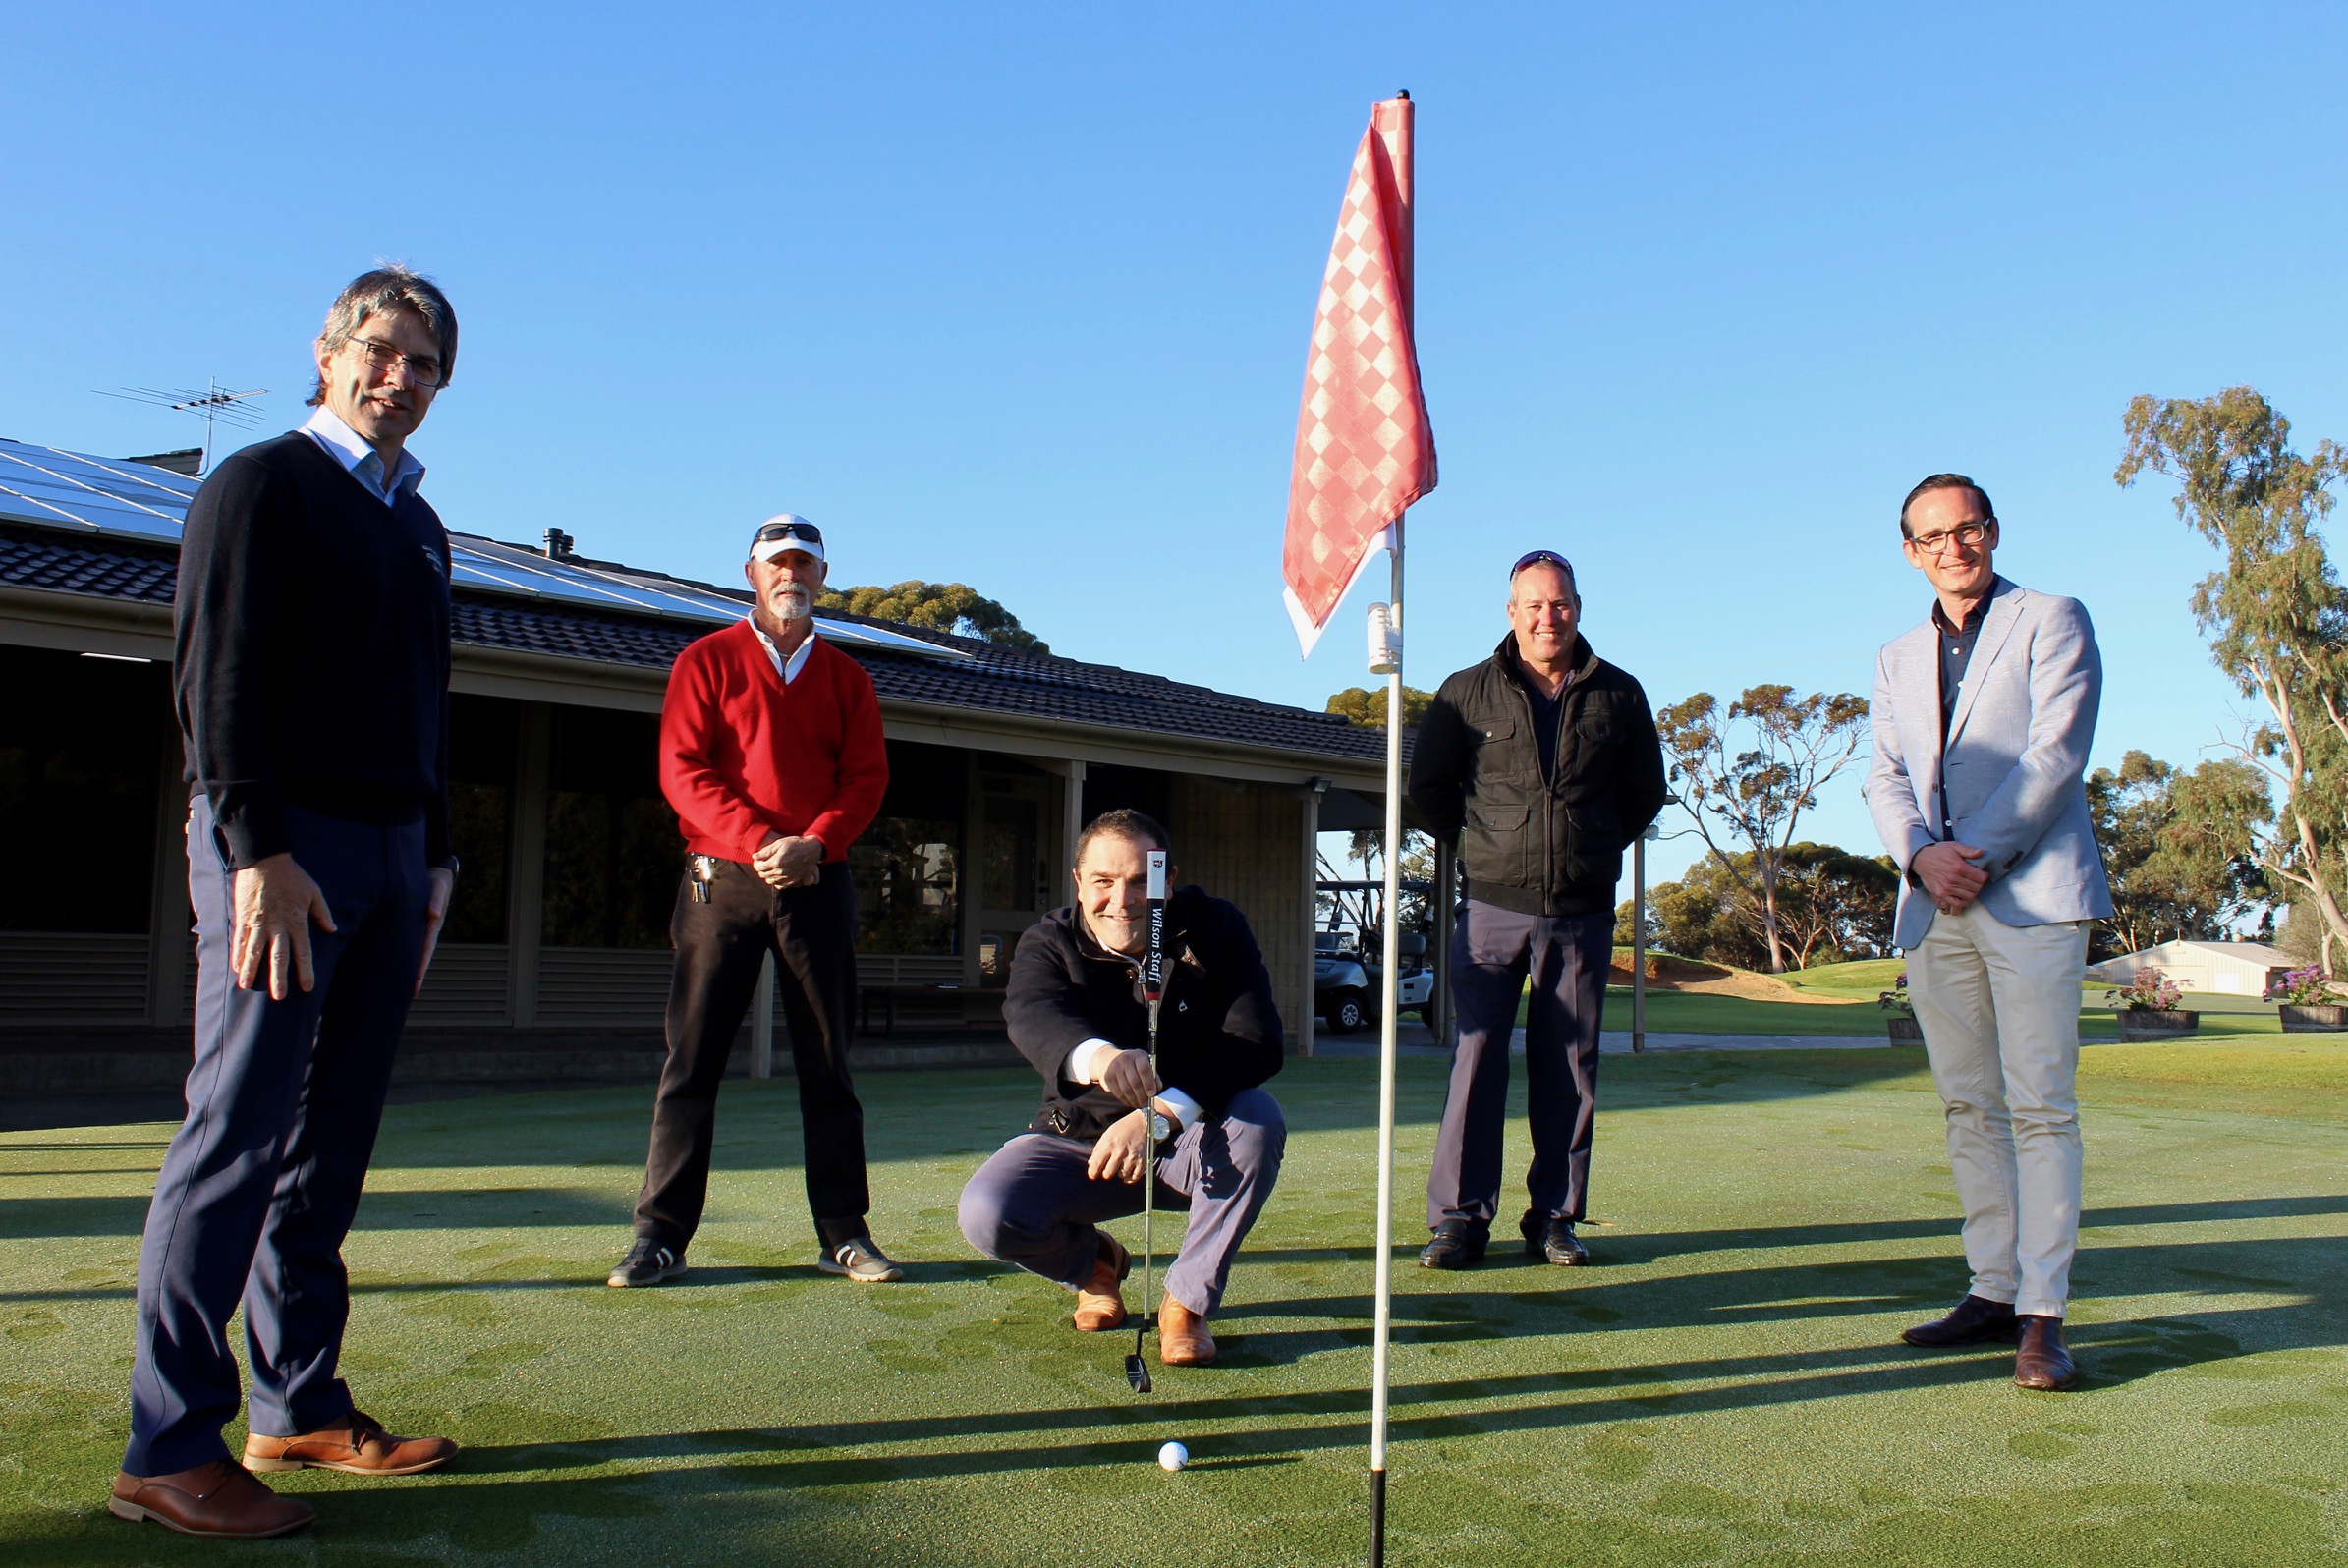 FUNDING BOOST FOR MURRAY BRIDGE GOLF COURSE